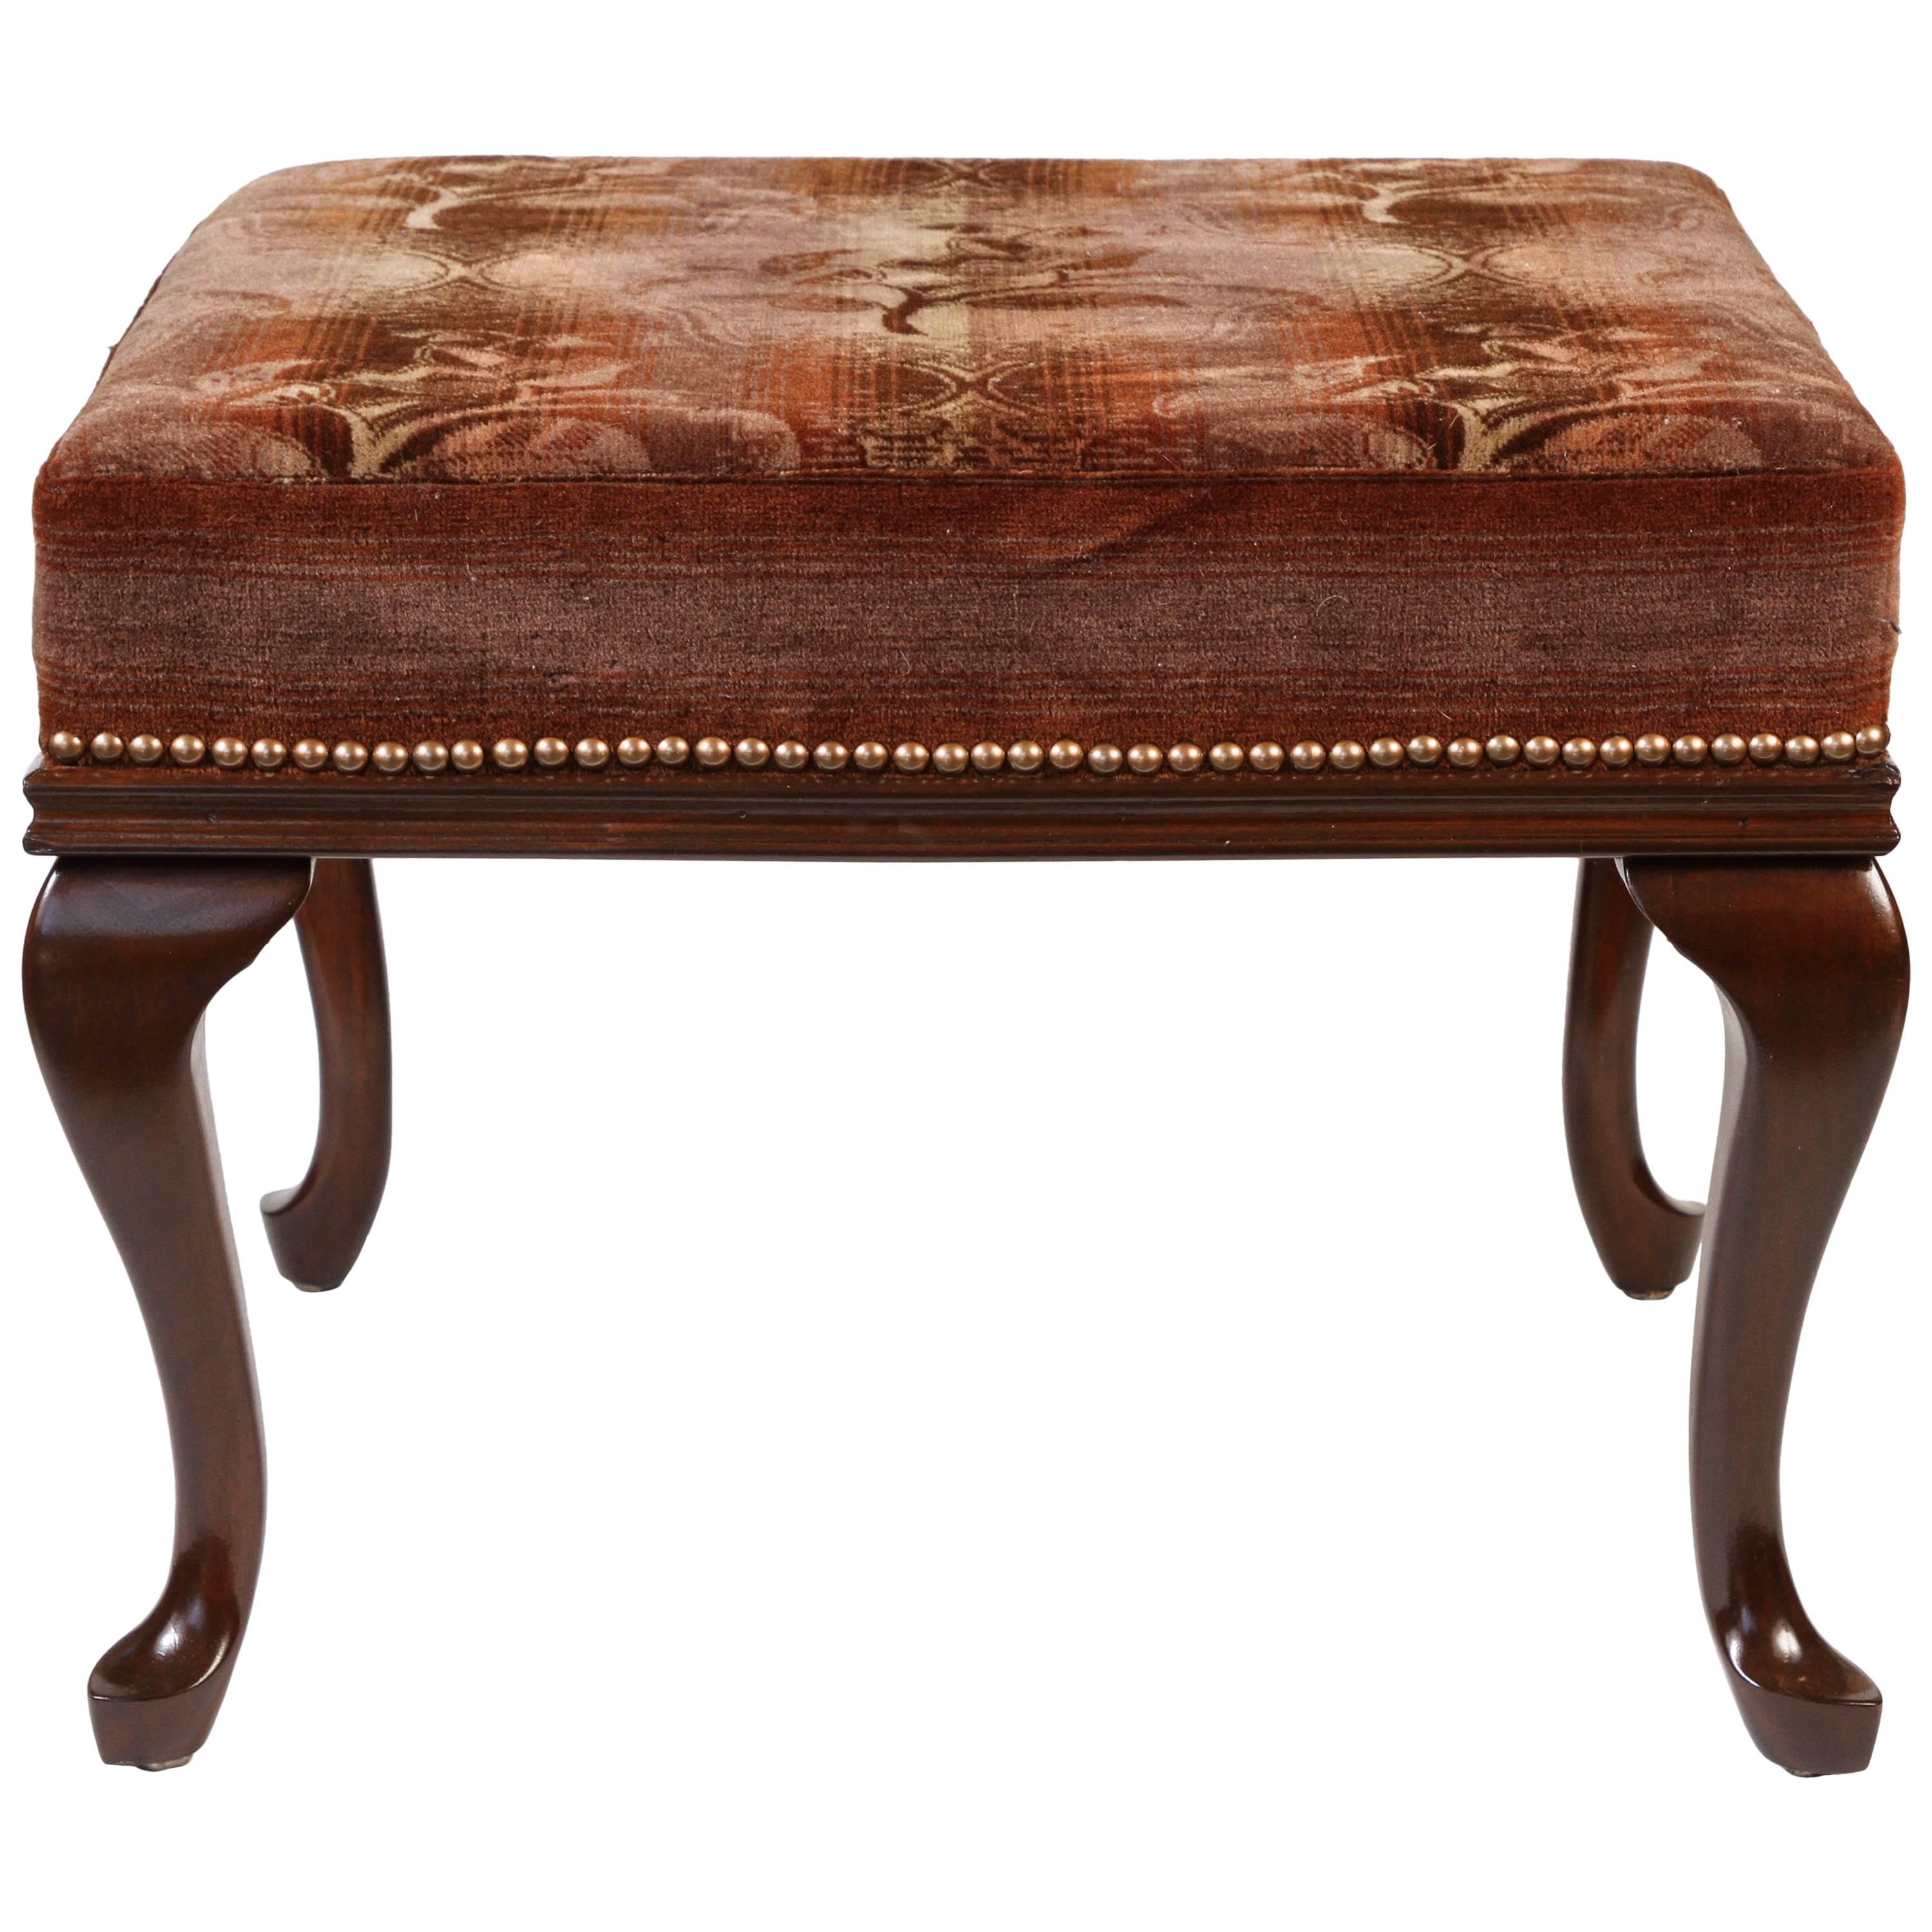 Antique Stool with Walnut Queen Anne Legs Newly Upholstered in Mohair